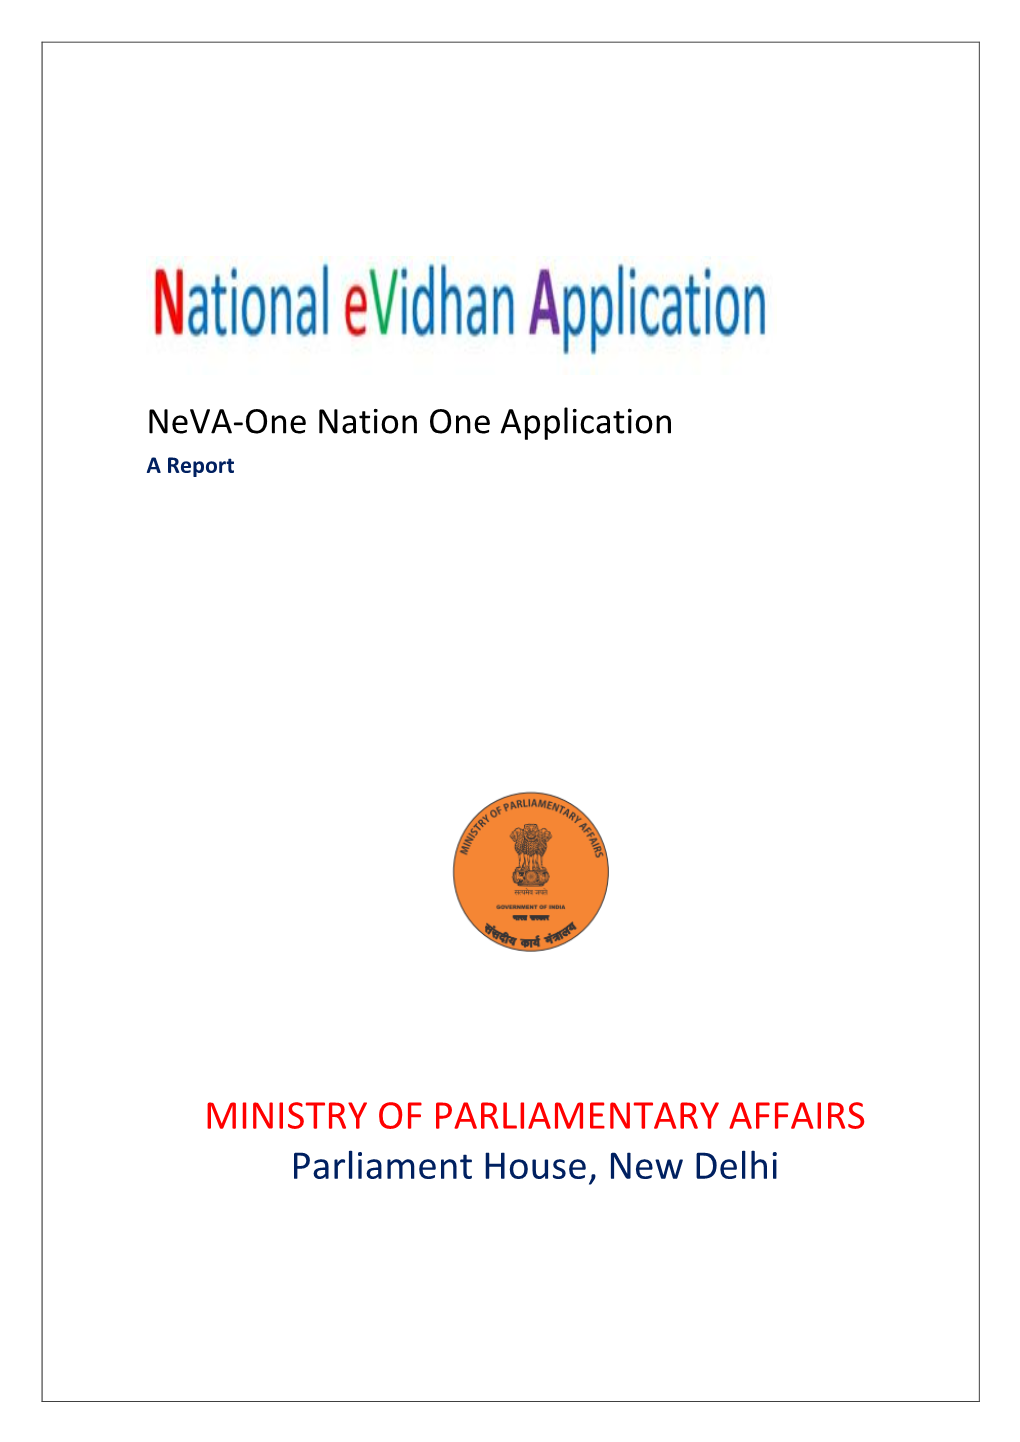 Neva-One Nation One Application a Report